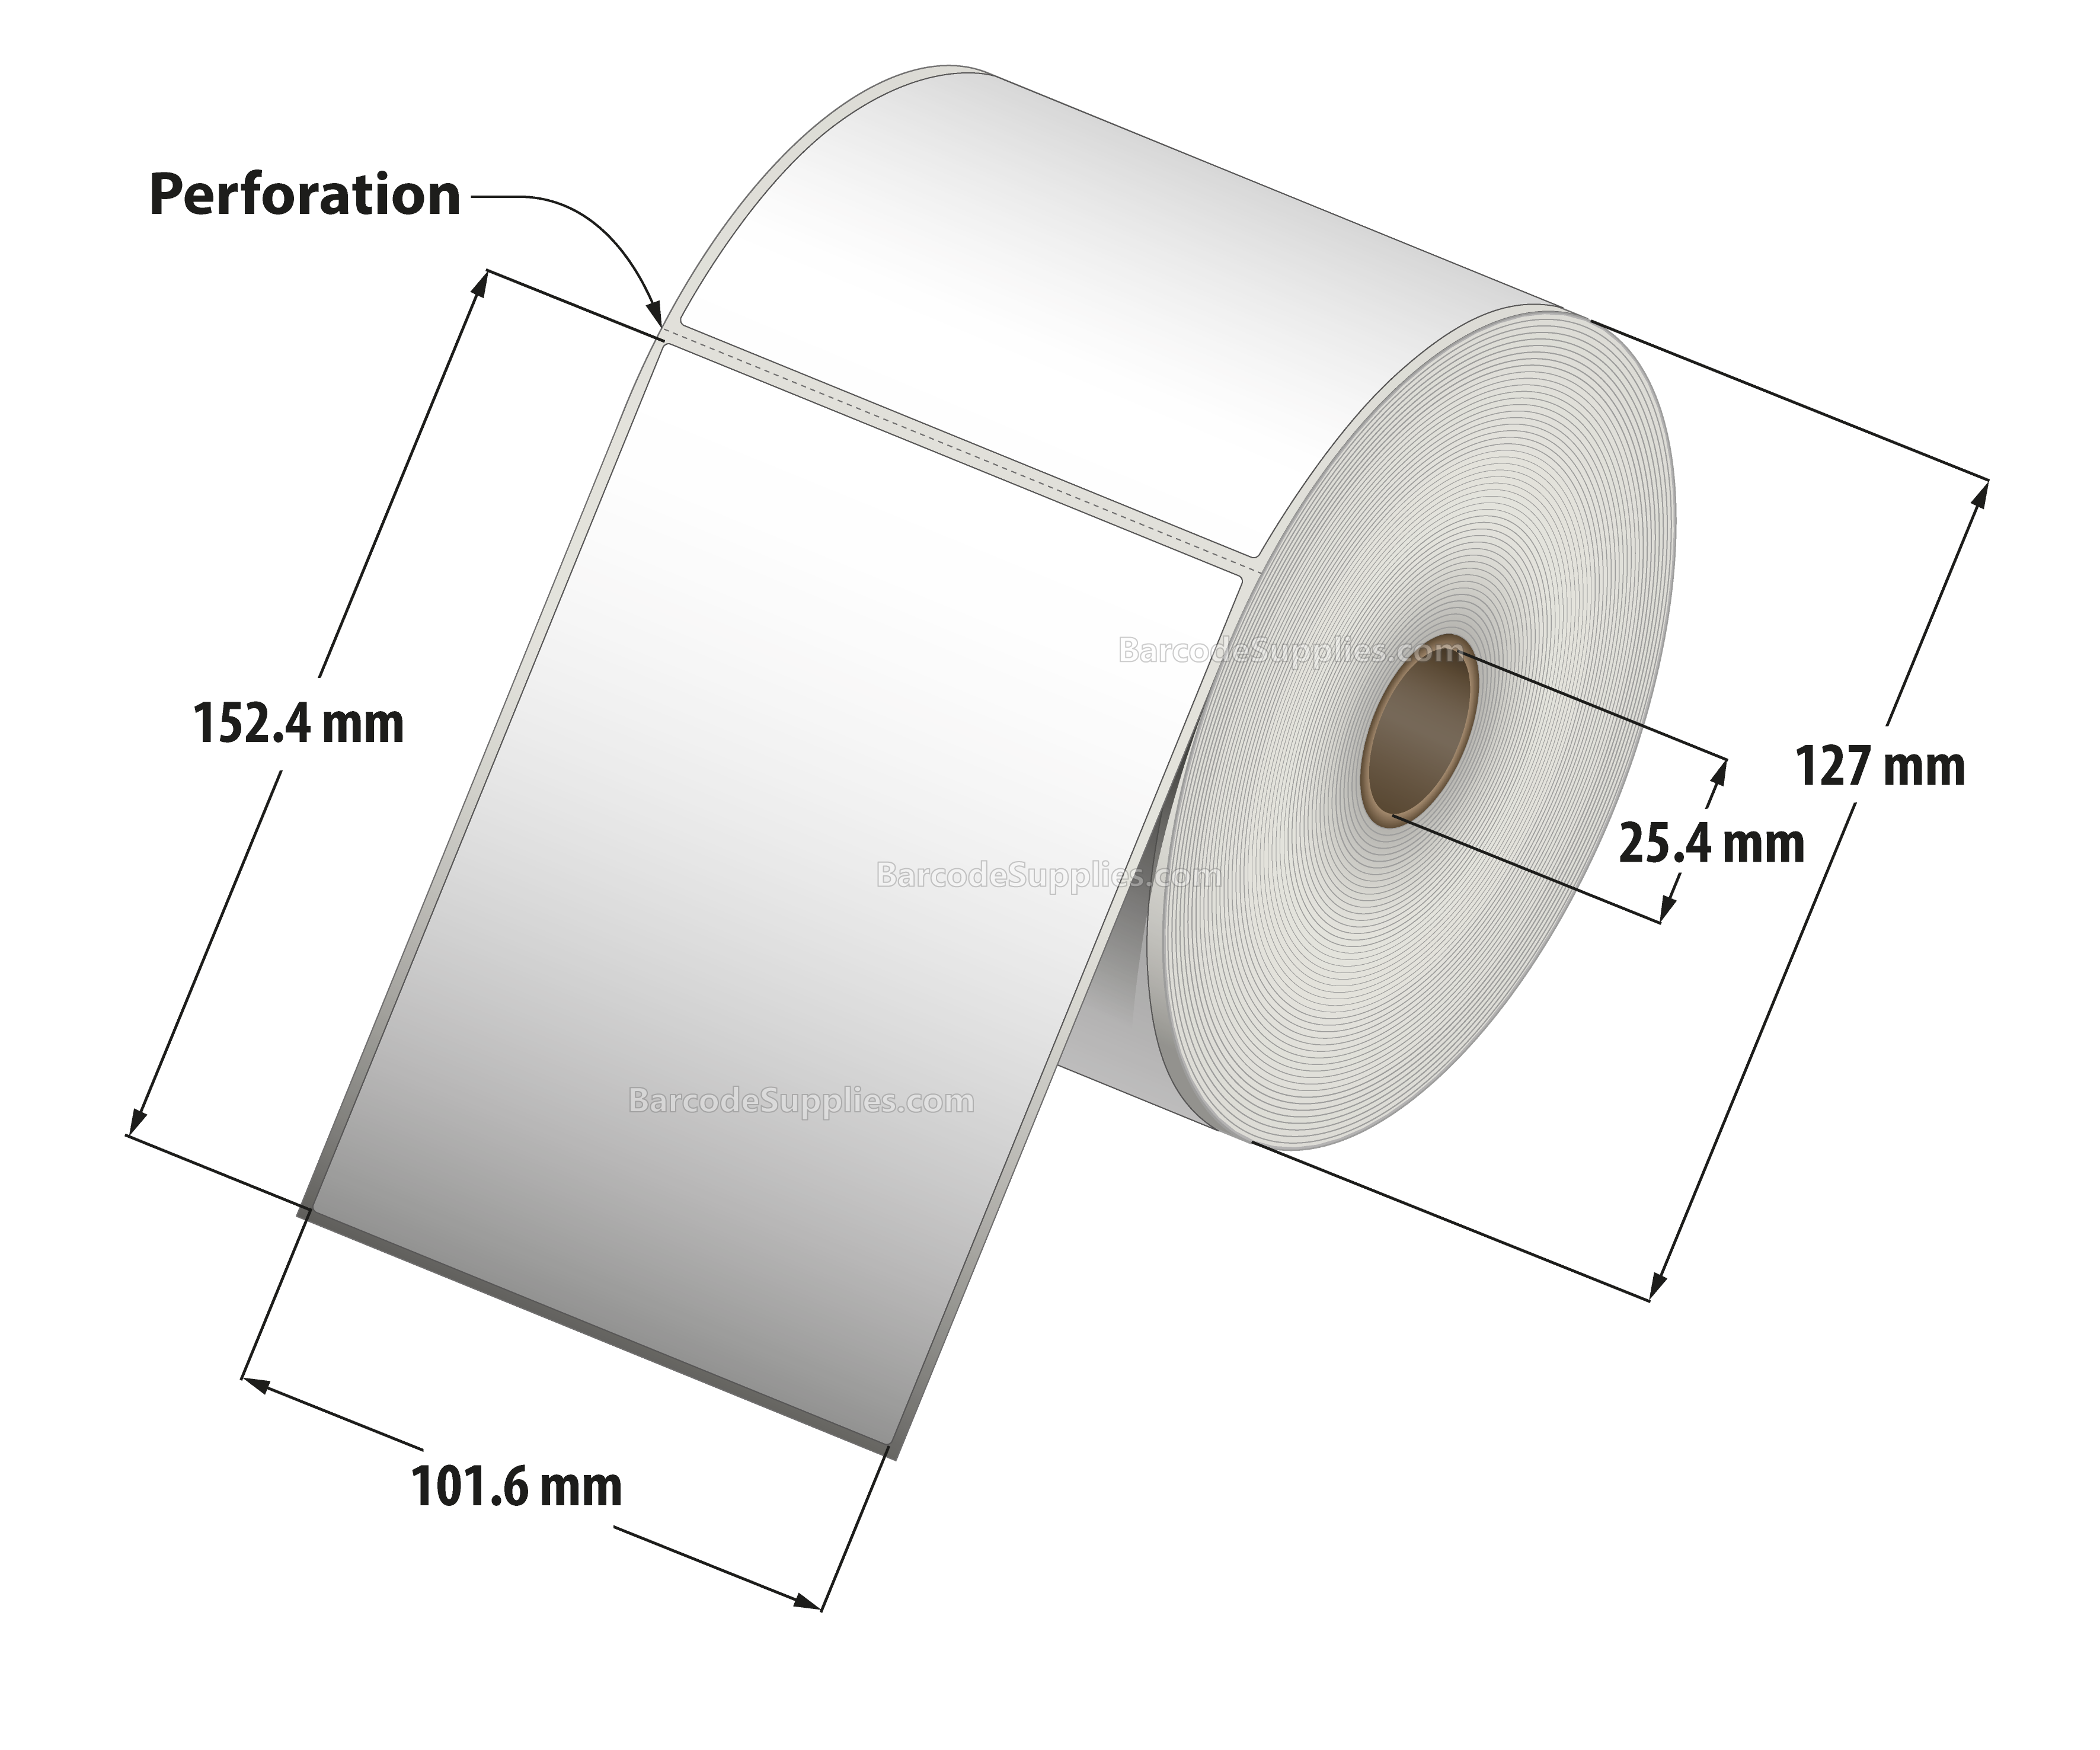 4 x 6 Direct Thermal White Labels With Acrylic Adhesive - Perforated - 460 Labels Per Roll - Carton Of 12 Rolls - 5520 Labels Total - MPN: RD-4-6-460-1 - BarcodeSource, Inc.